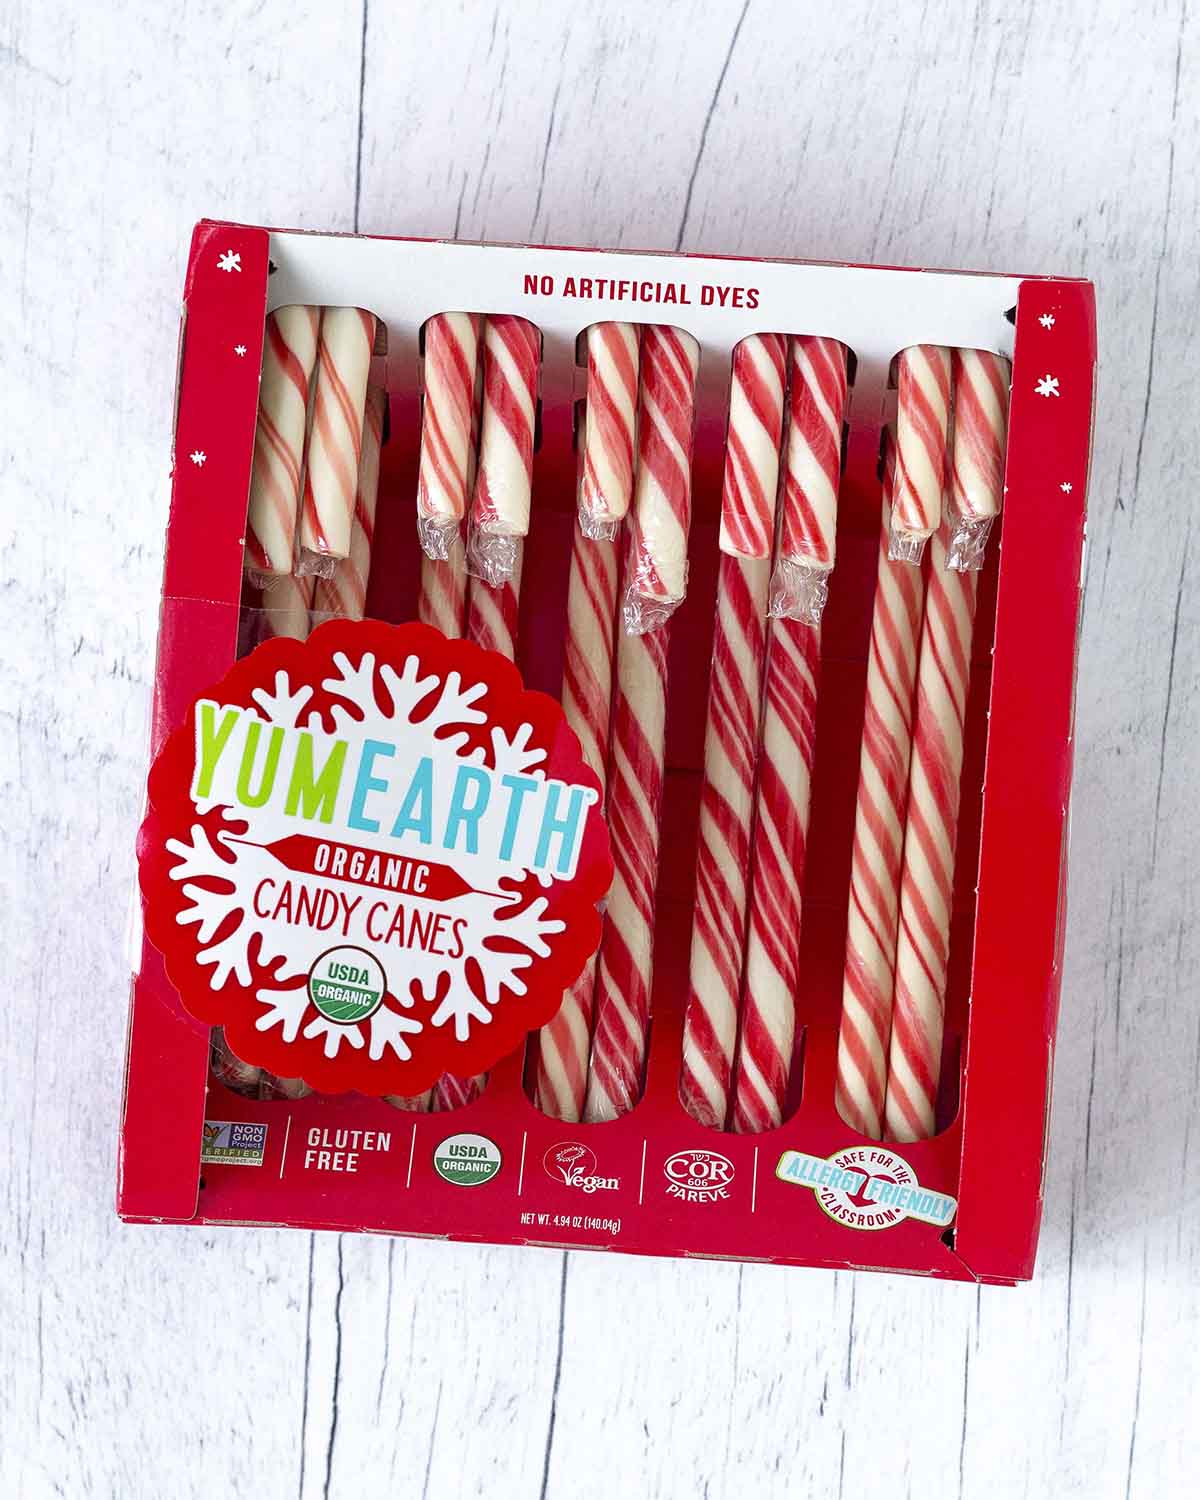 An overhead shot of a box of YumEarth vegan candy canes.